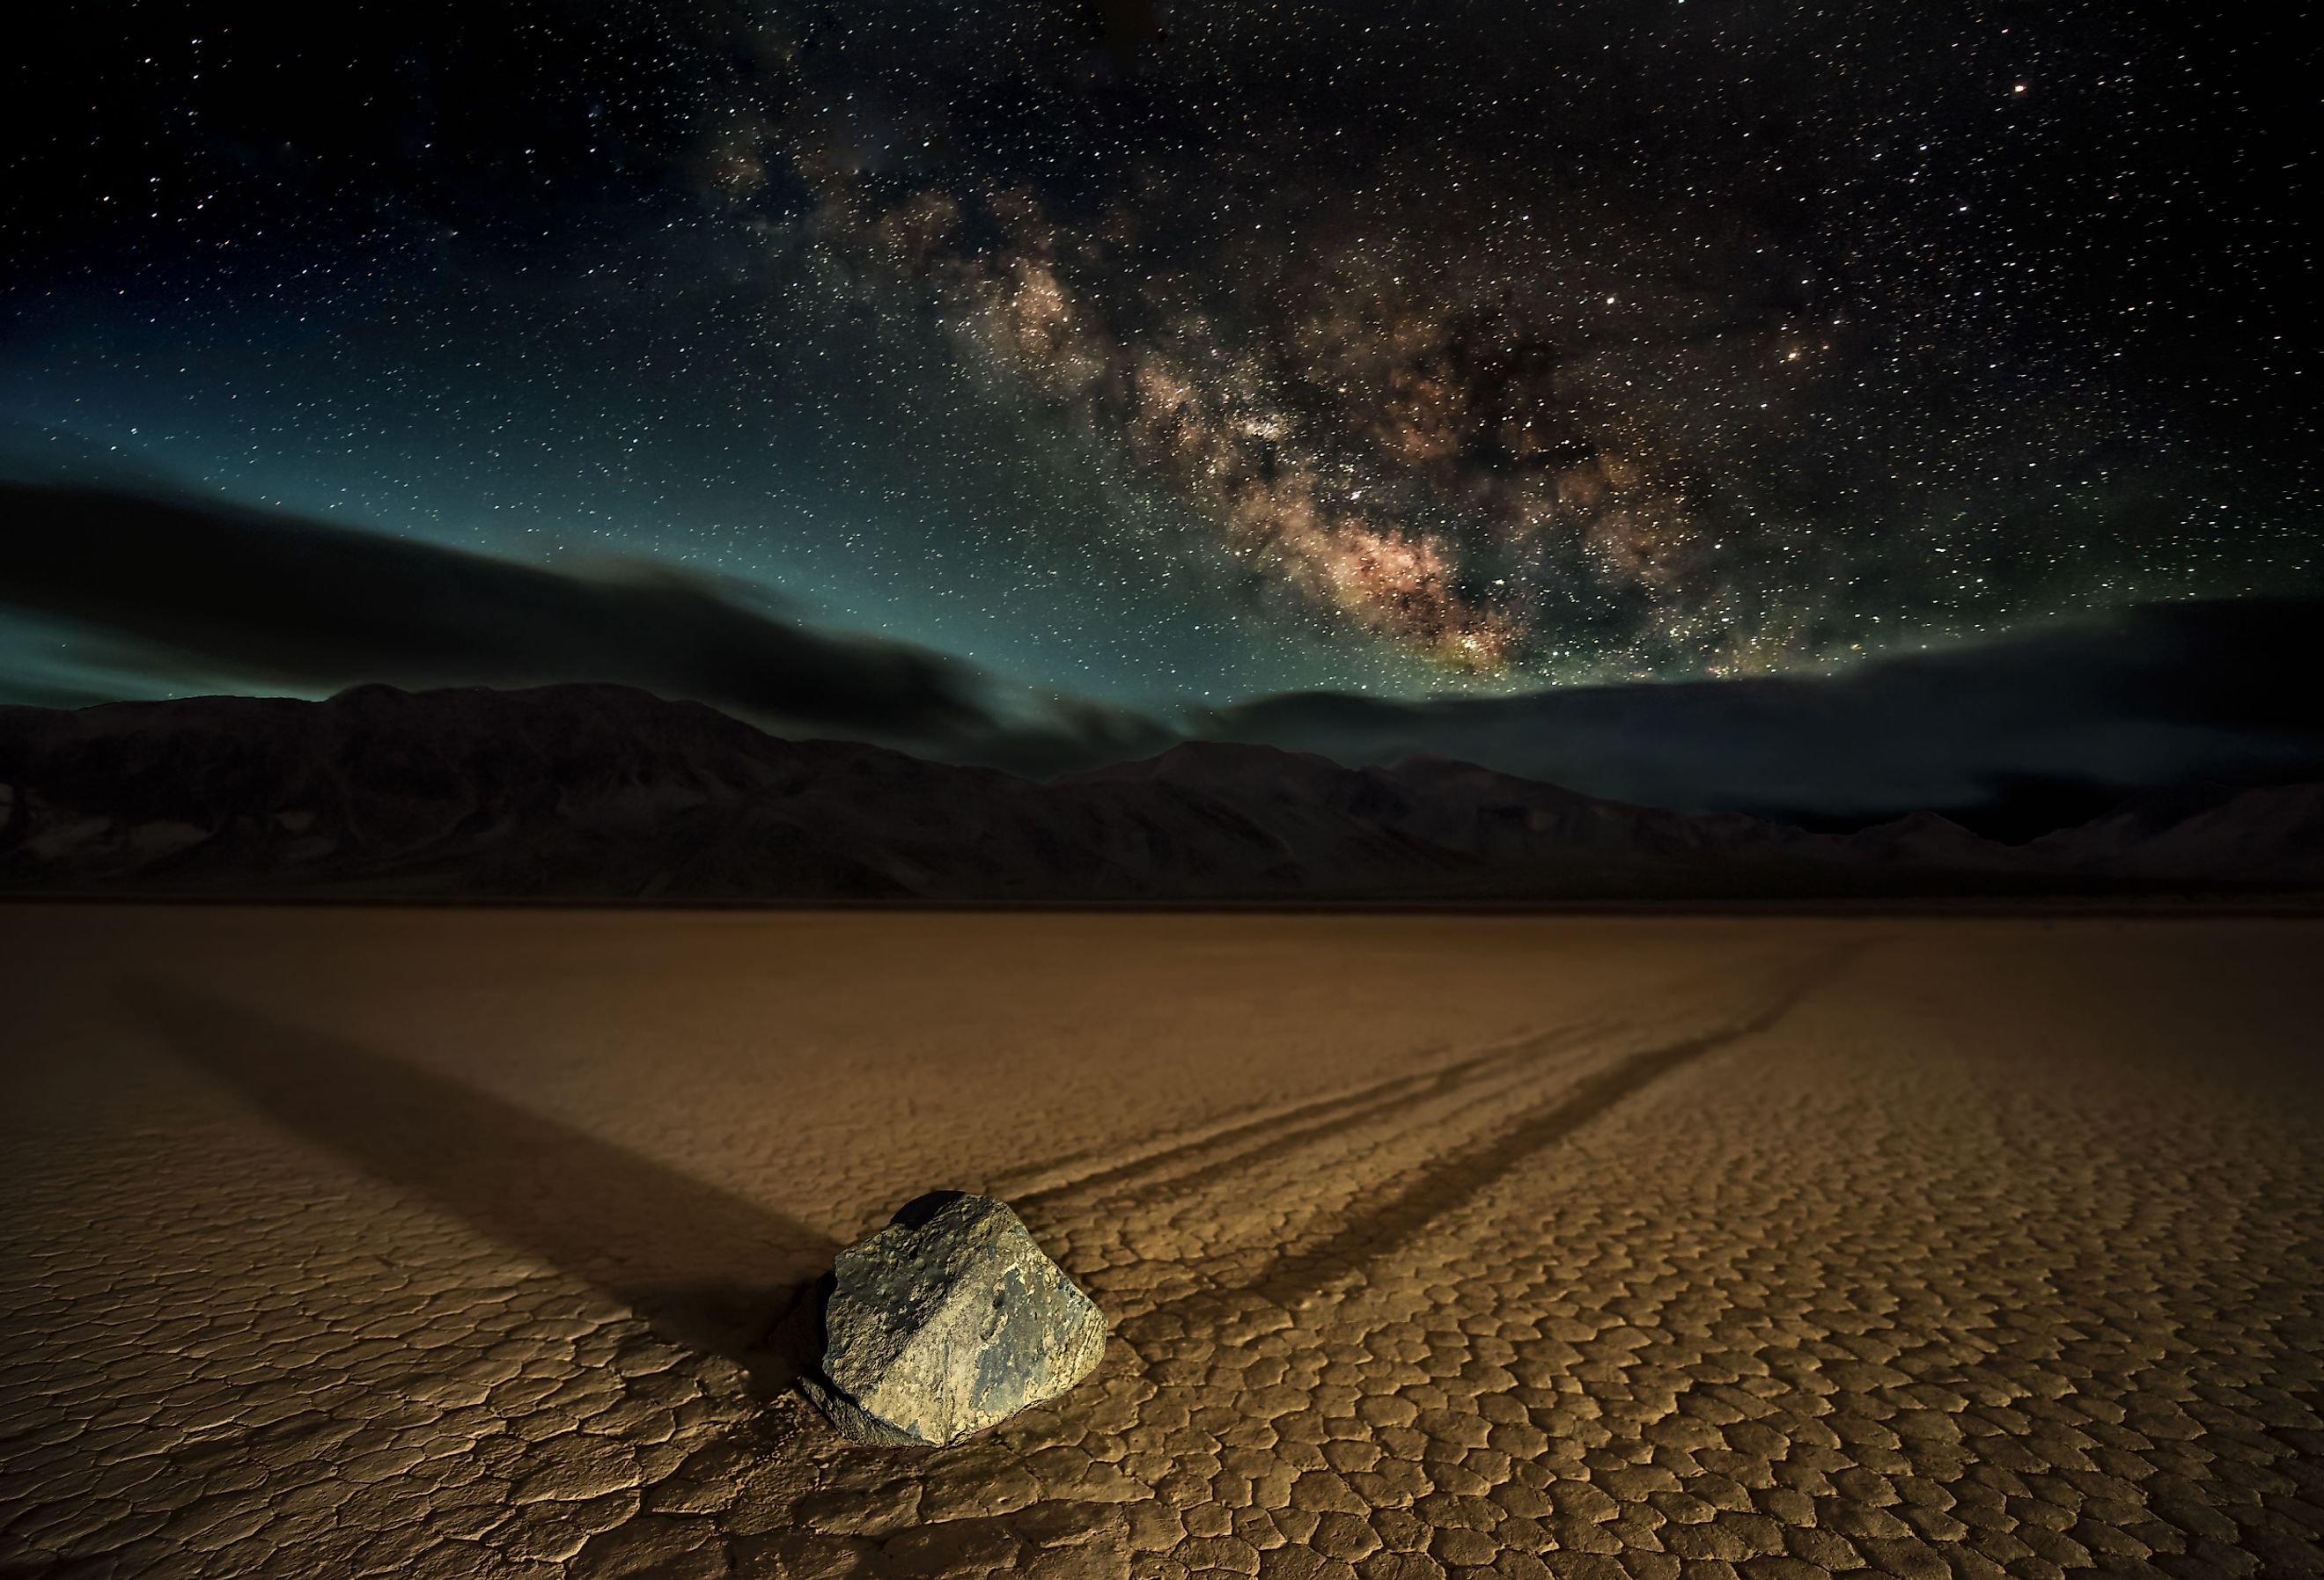 Racetrack Playa. A 'Sailing Stone' photographed at night under the Milky Way at California's Death Valley National Park at the Racetrack Playa. An alien, eerie, and mysterious spectacle.